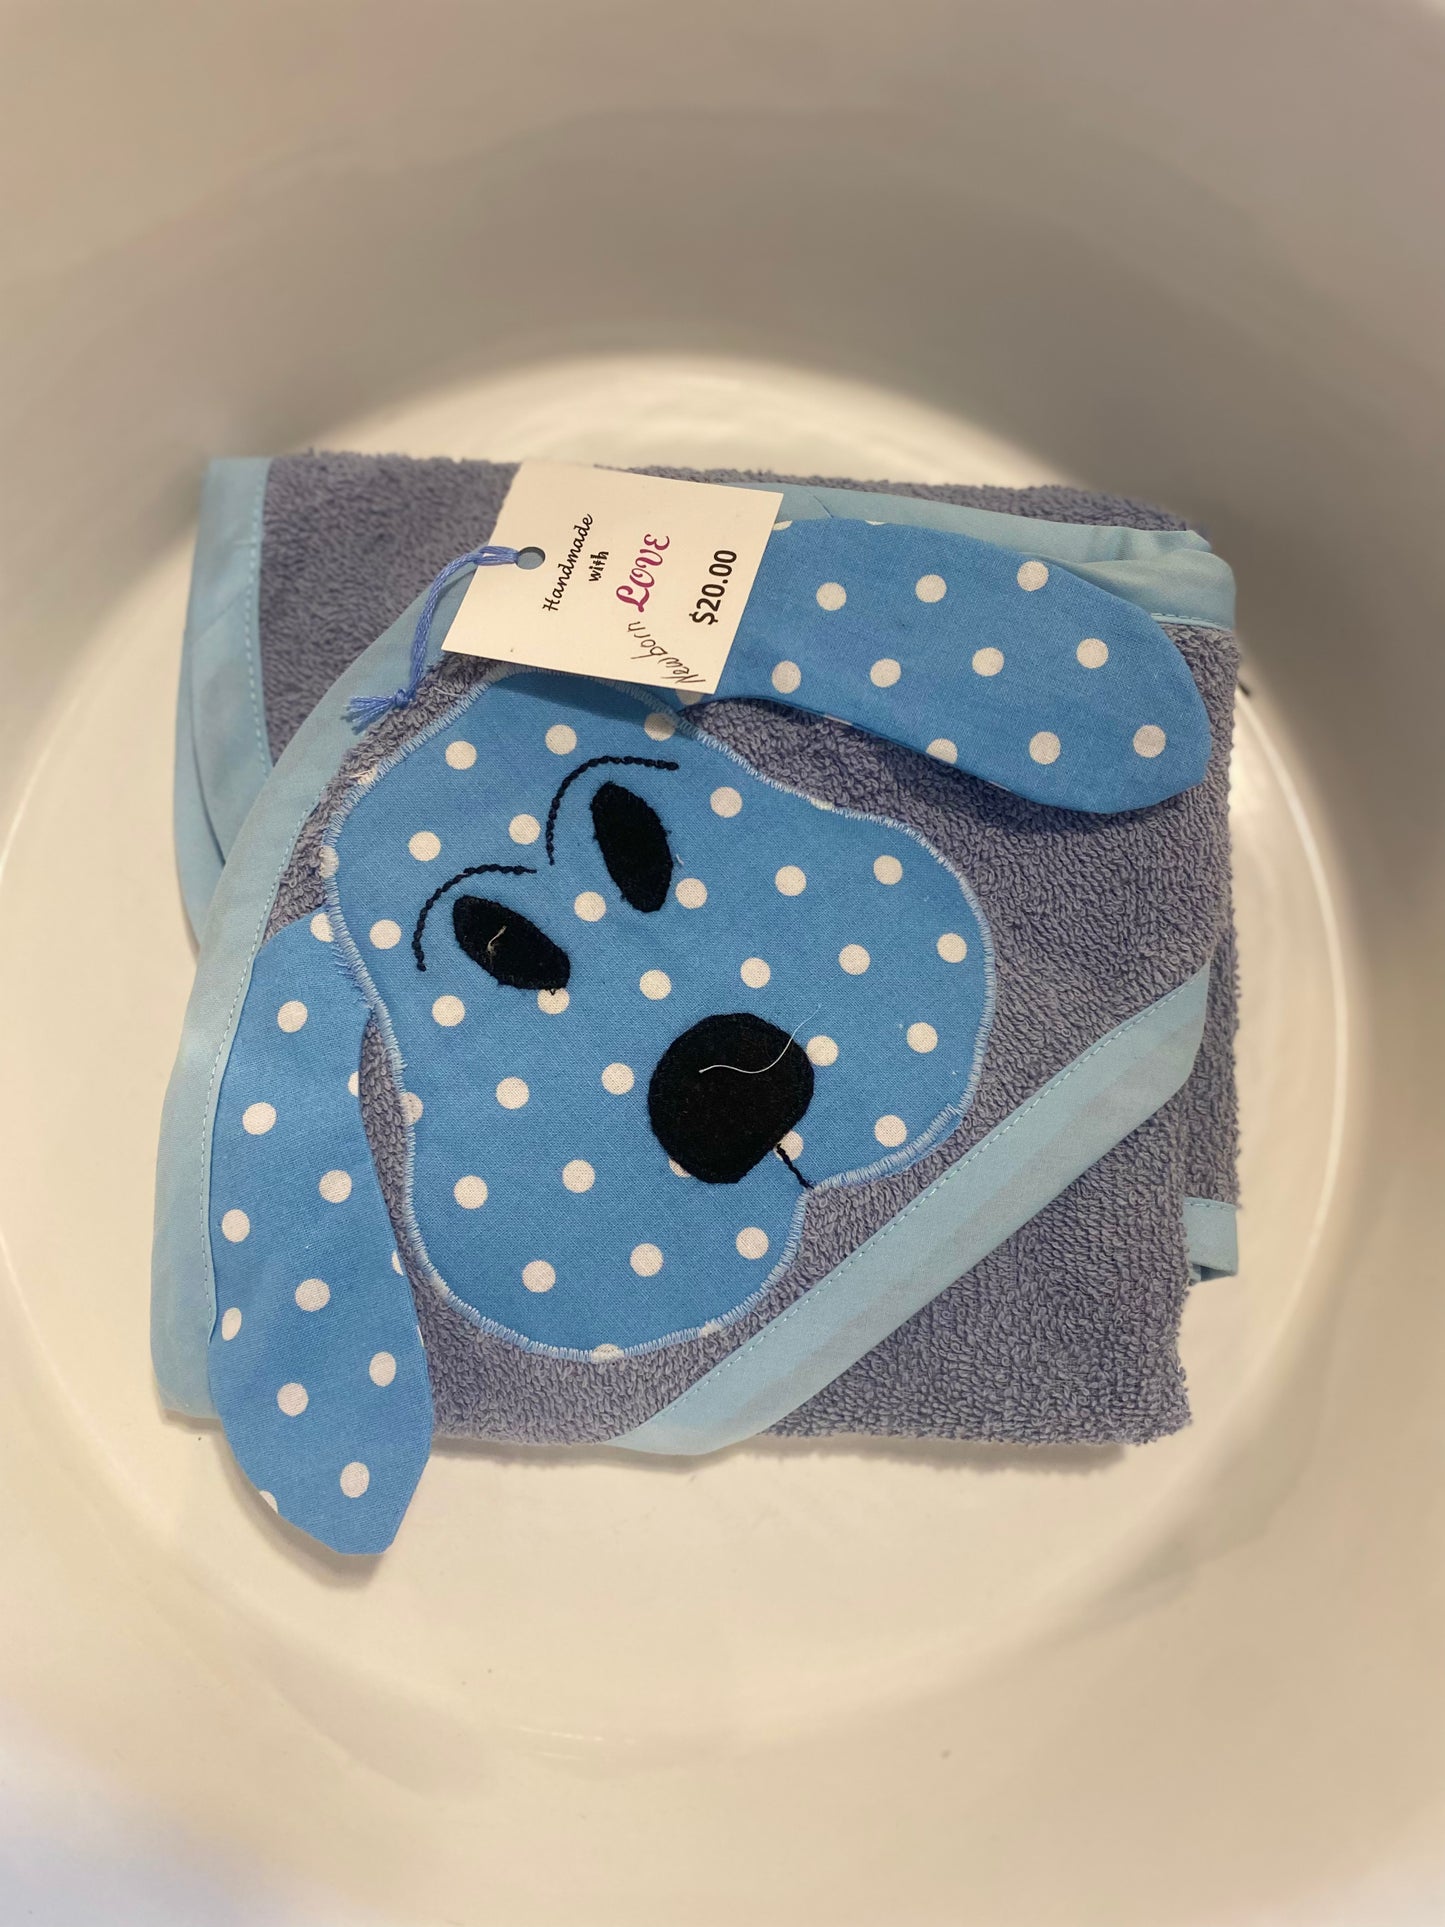 Hooded Baby Towels